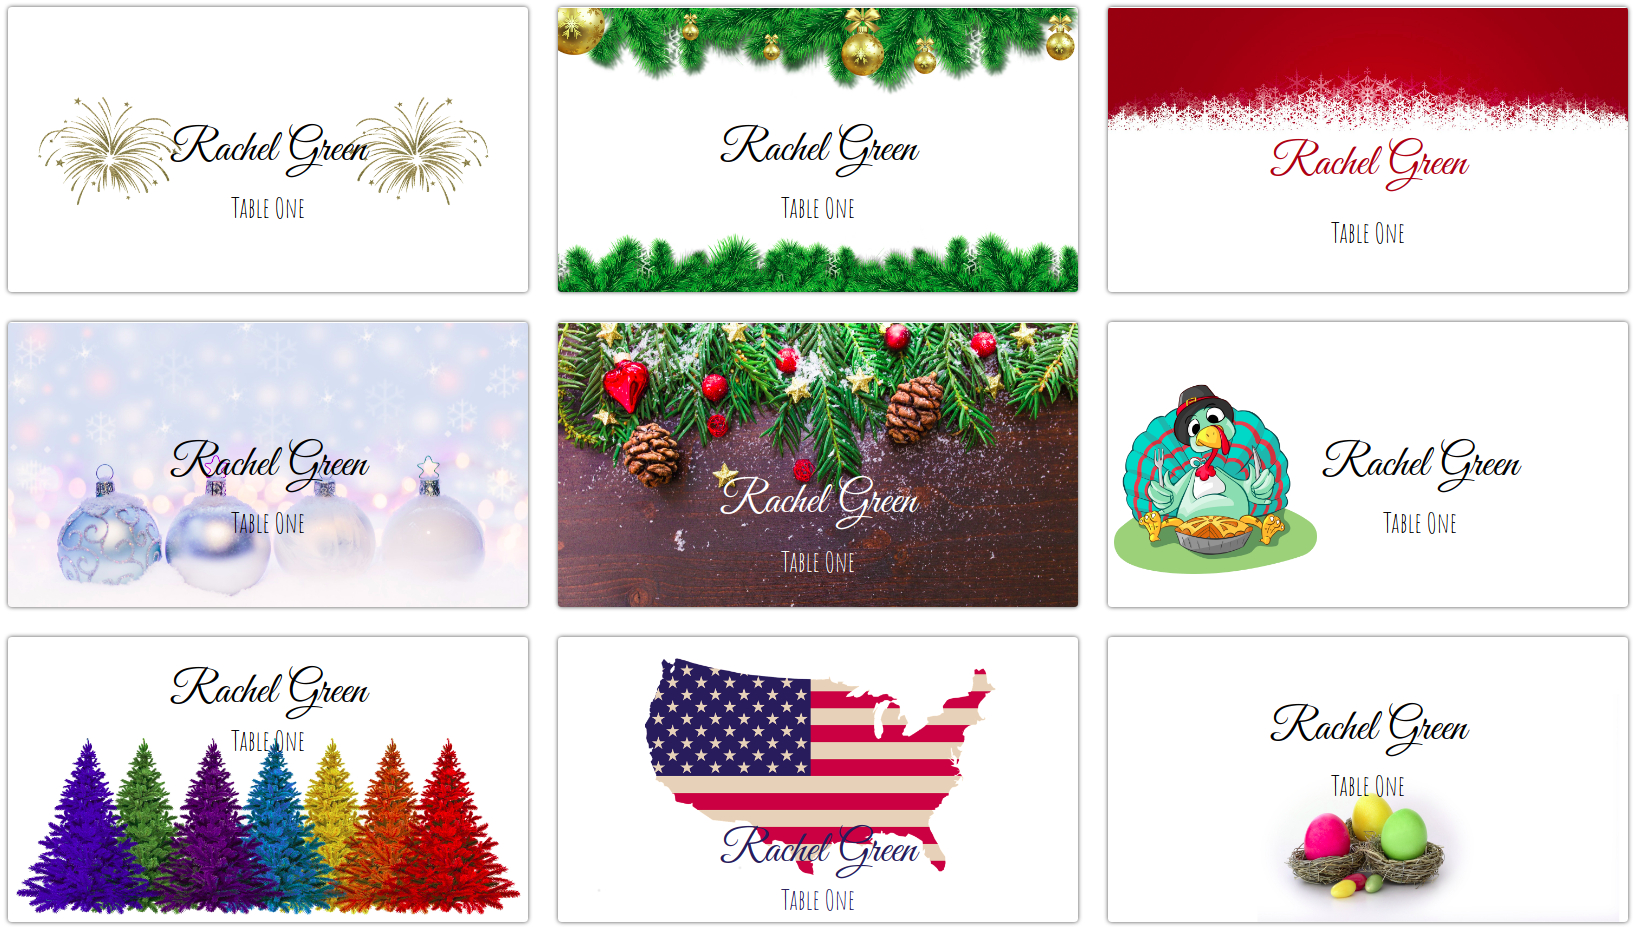 Making Your Own Holiday Place Cards At Home | Place Card Me Within Christmas Table Place Cards Template